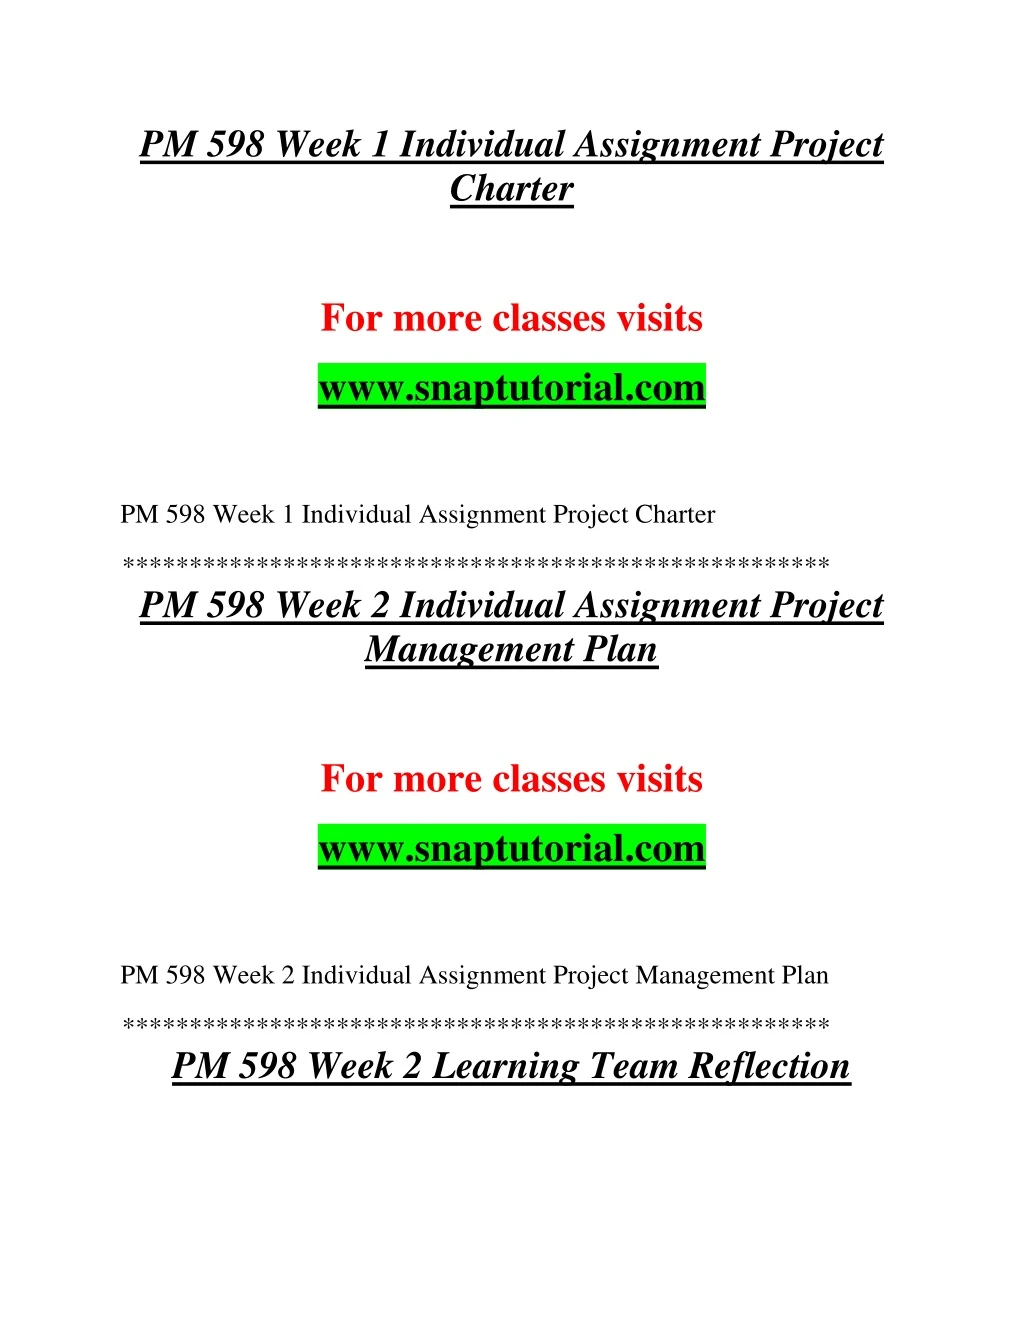 pm 598 week 1 individual assignment project